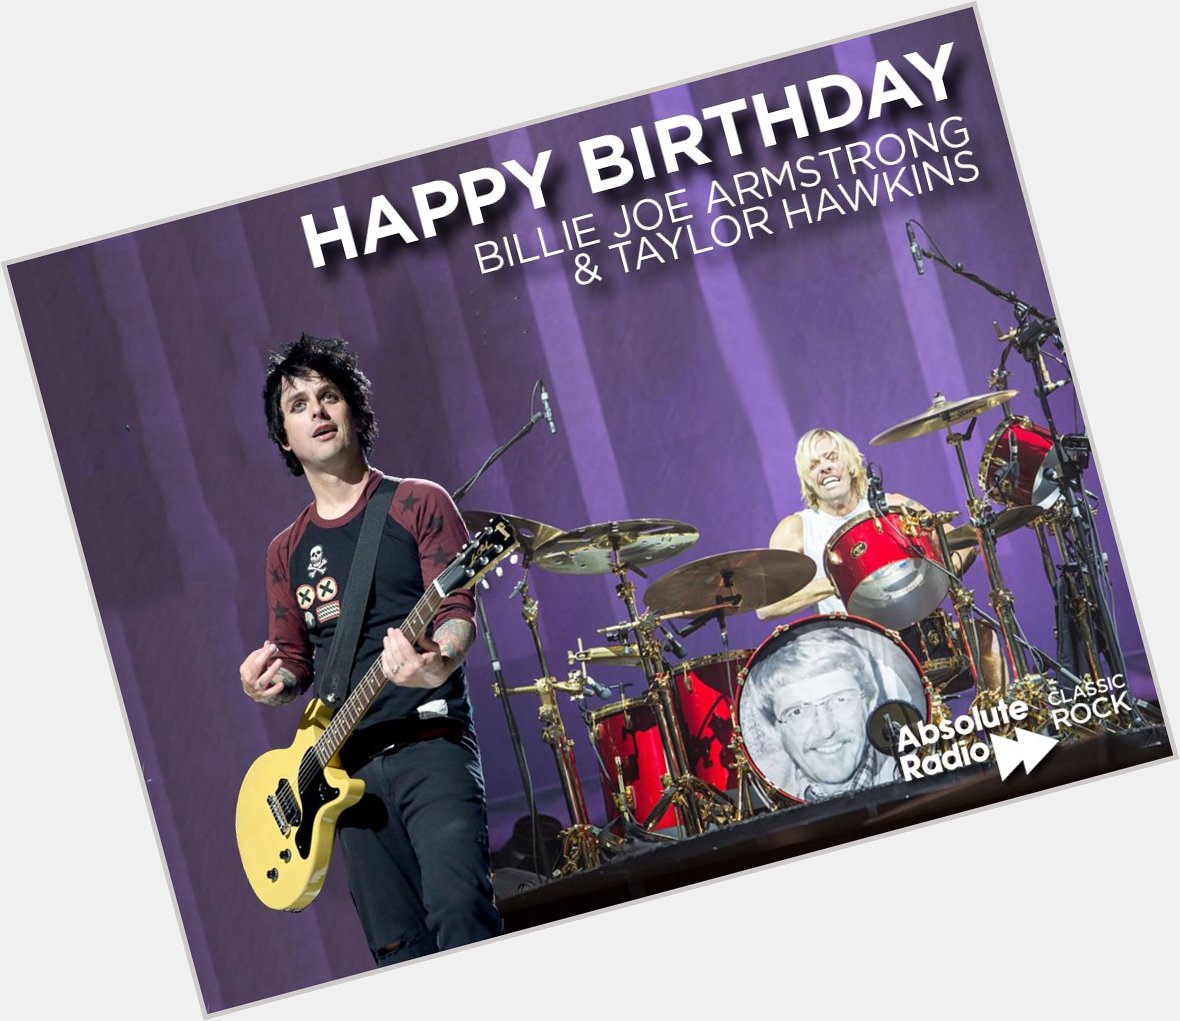 Happy birthday to Taylor Hawkins & Billie Joe Armstrong, both 47 today!
Imagine if they formed a band together! 